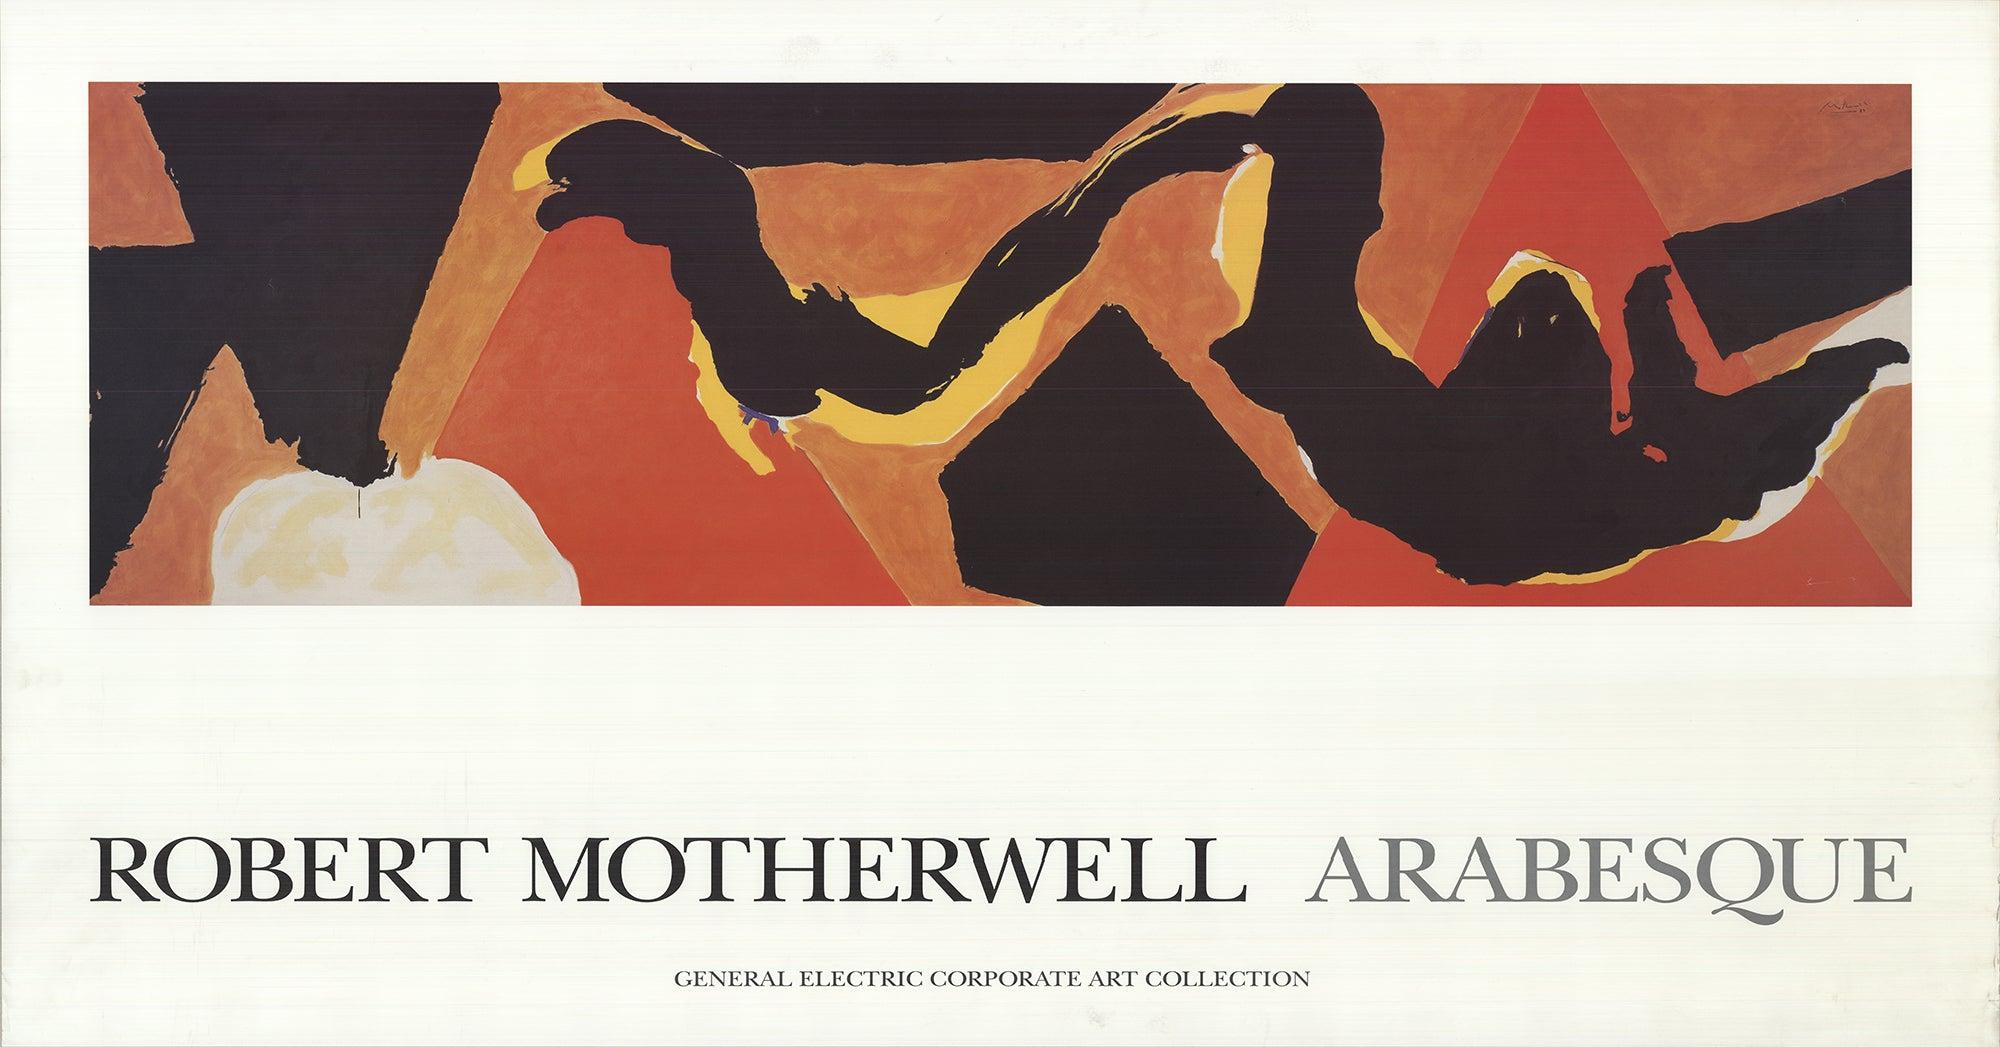 The link between Robert Motherwell and General Electric Corporation centers around a series of commissioned works. In the early 1980s, General Electric (GE) commissioned Motherwell, a prominent American abstract expressionist painter, to create a